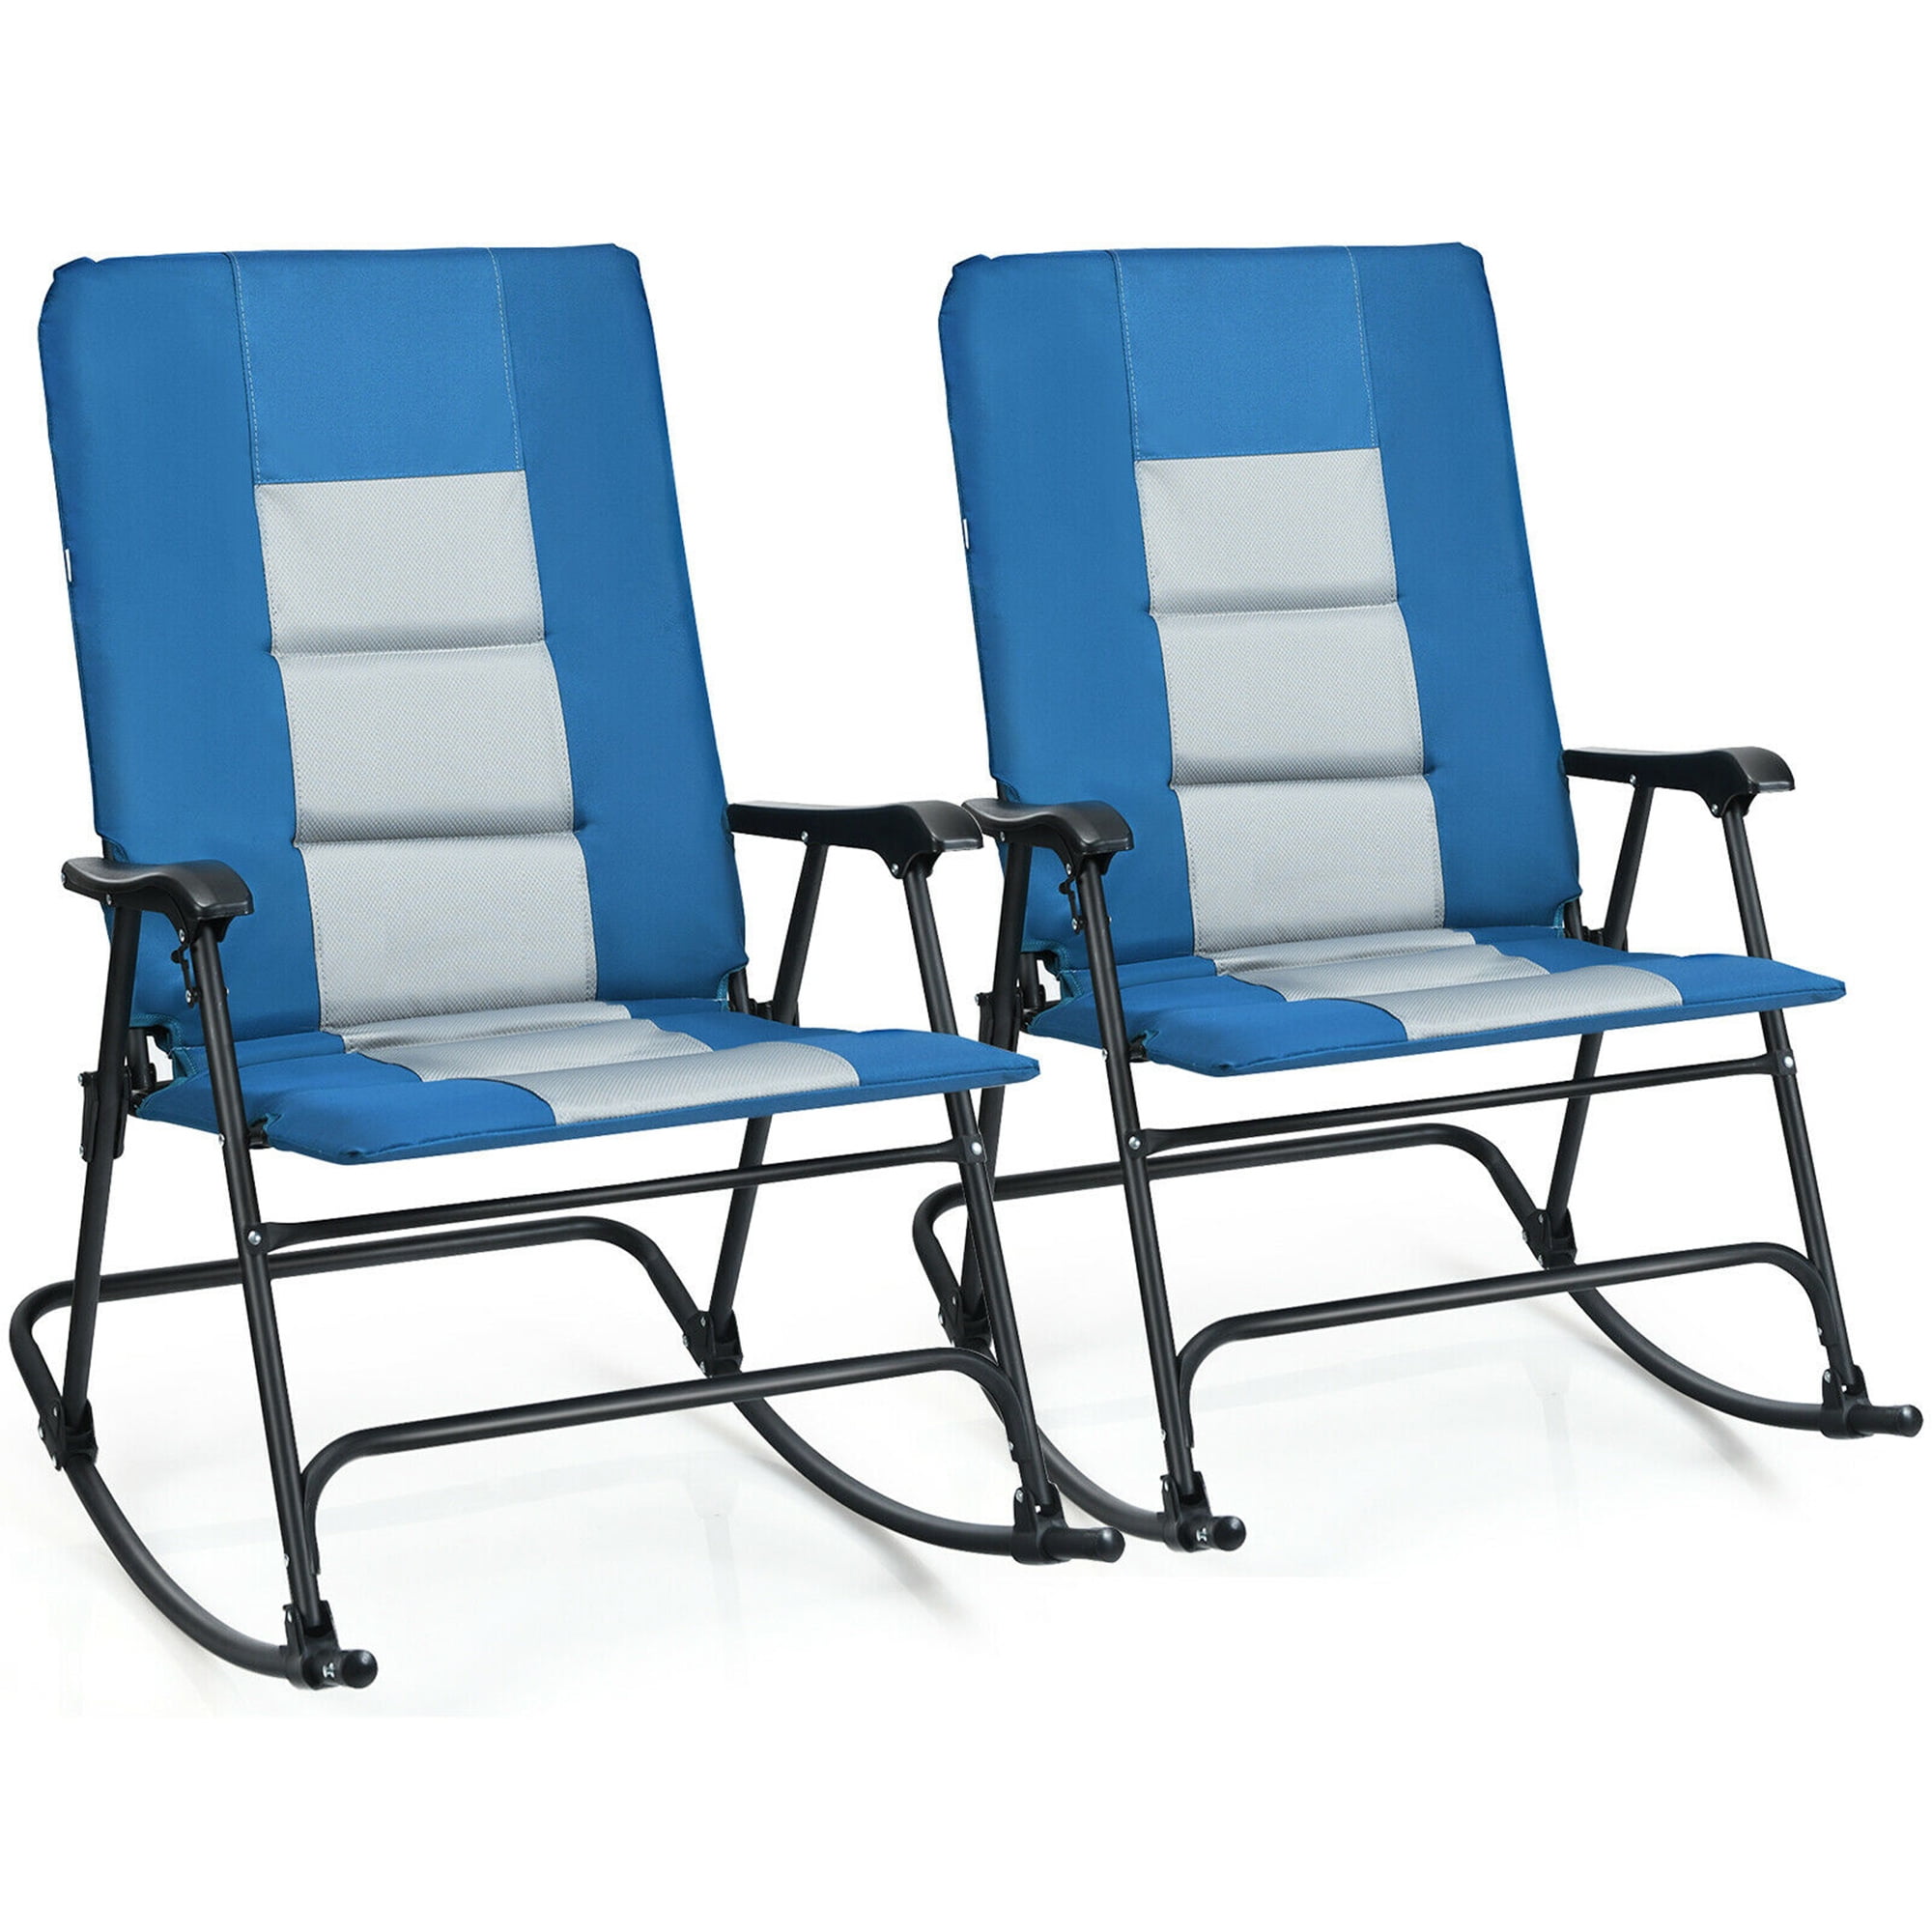 Gymax Set of 2 Padded Folding Rocking Chairs Patio Garden Yard Camping Blue